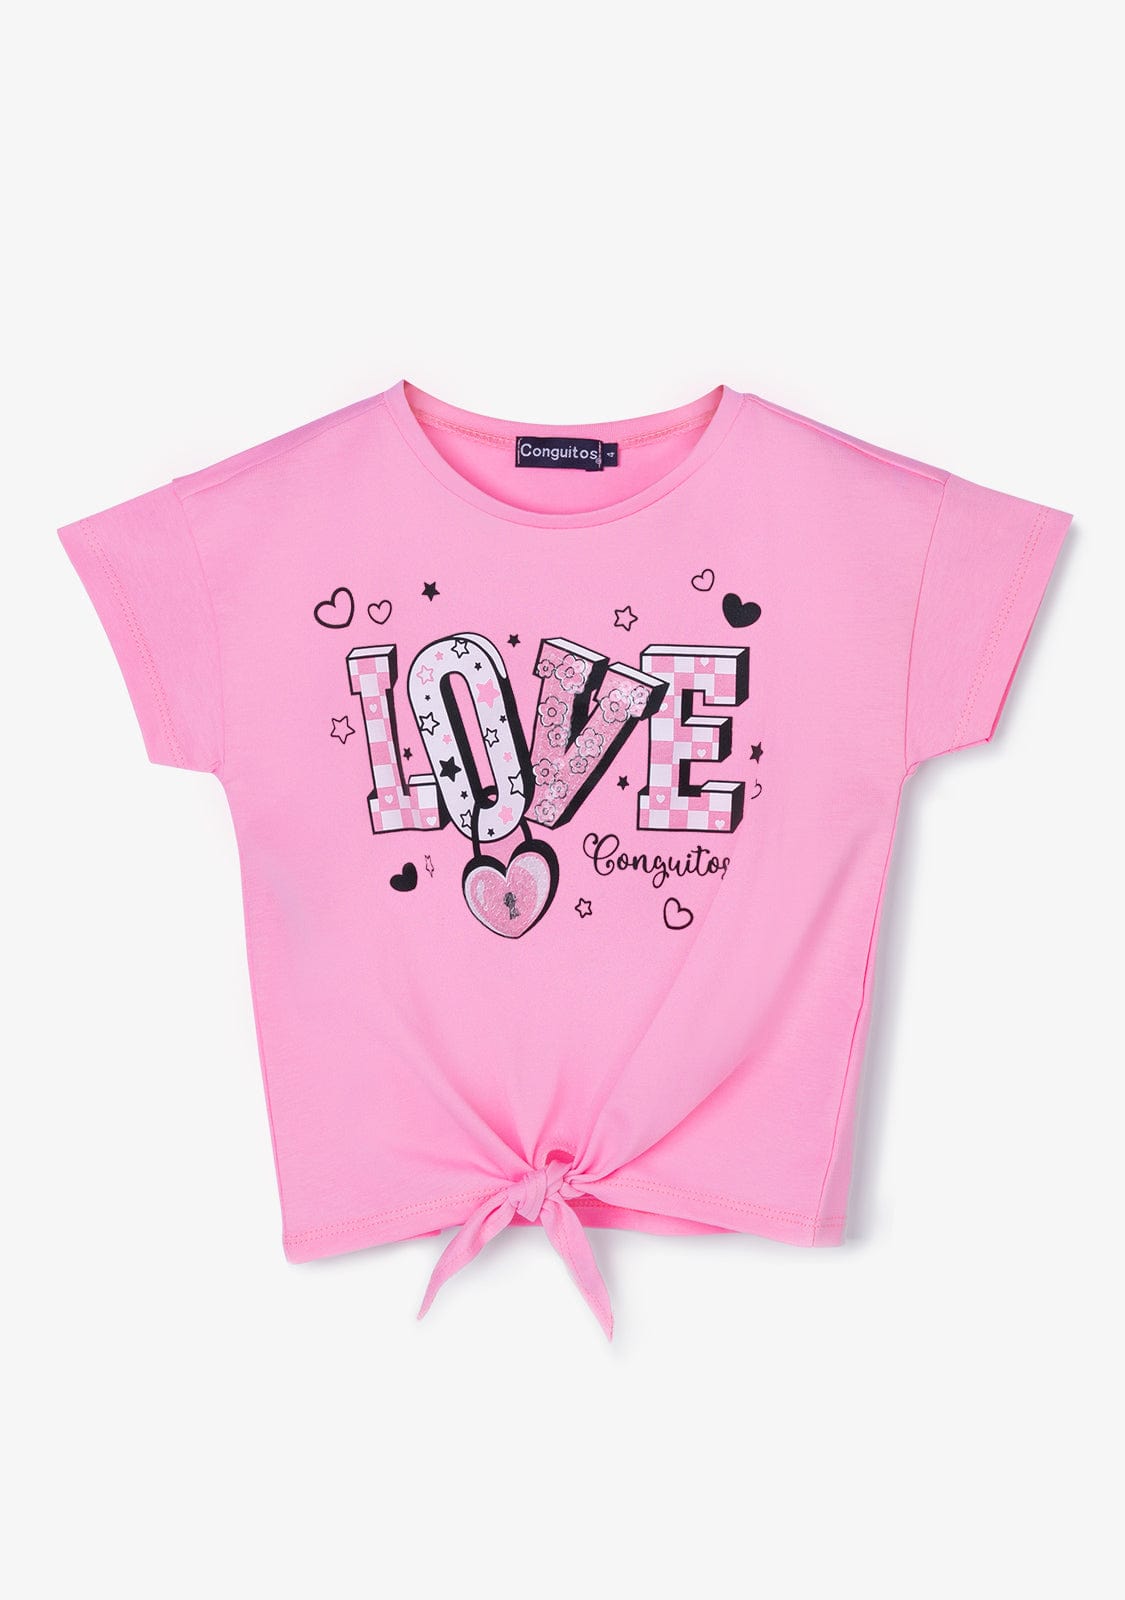 CONGUITOS TEXTIL Clothing Girl´s Pink Love Knotted Print T-shirt